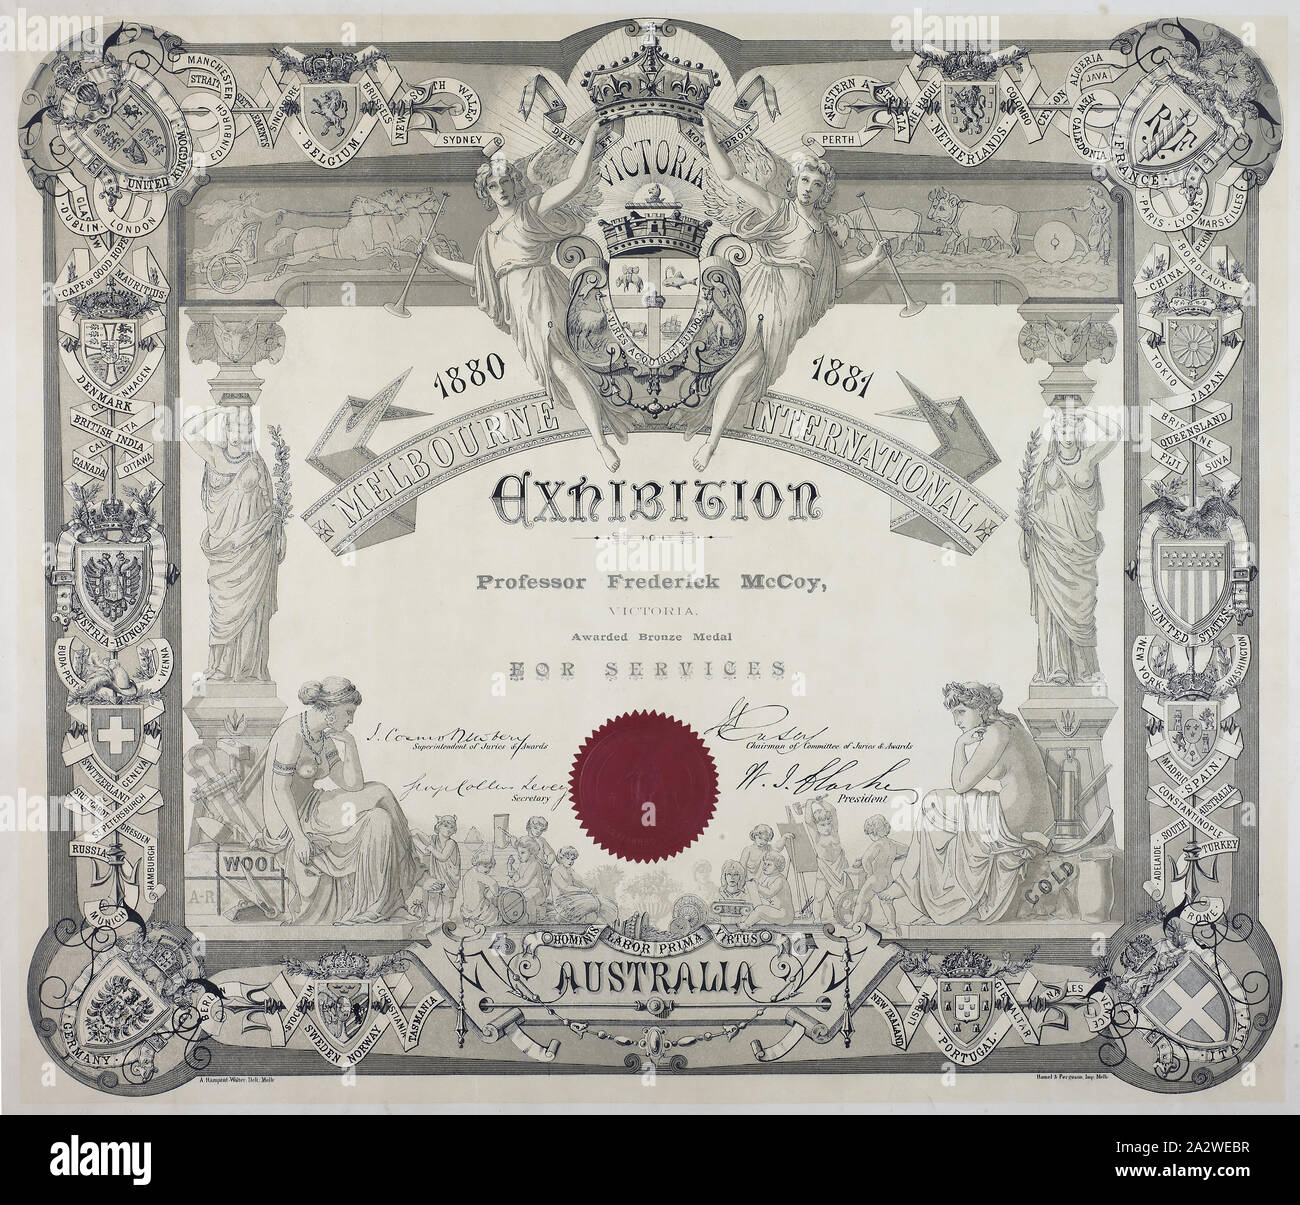 Certificate - Melbourne International Exhibition, Awarded to Thomas Gaunt, 1880-1881, Certificate of fourth order of merit awarded to Thomas Gaunt, Melbourne for barometers, thermometers and hydrometers, at the Melbourne International Exhibition, 1880-81 Stock Photo